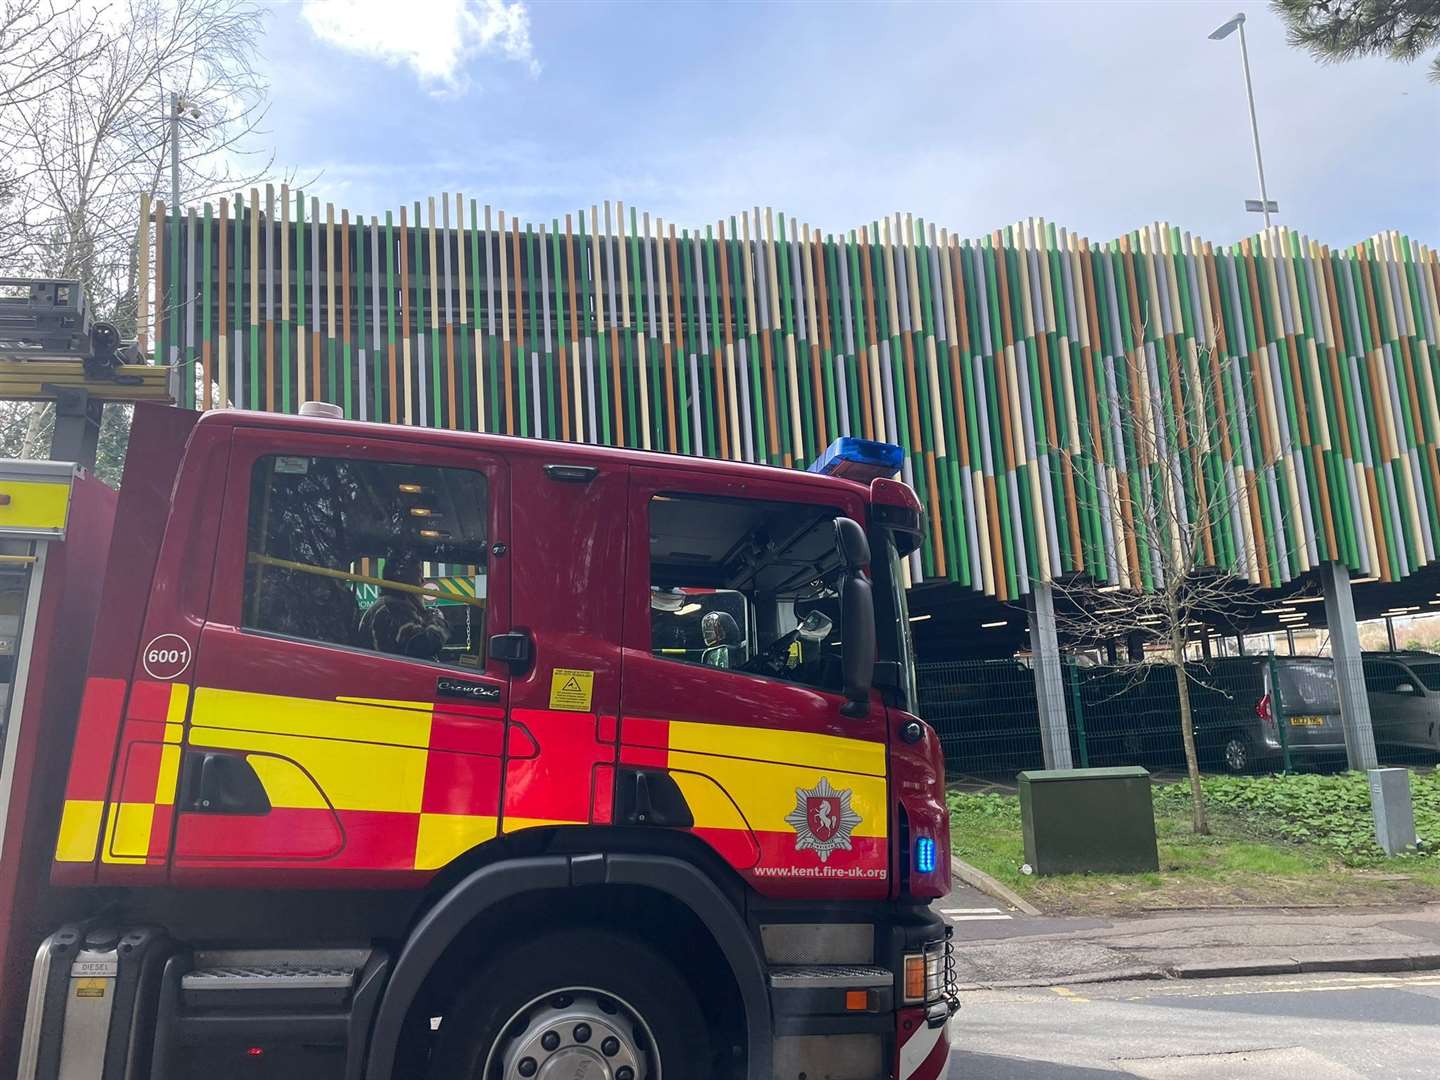 Firefighters are working to put out a “thick and powerful” blaze at a multi-storey car park in Bradbourne Car Park in Sevenoaks